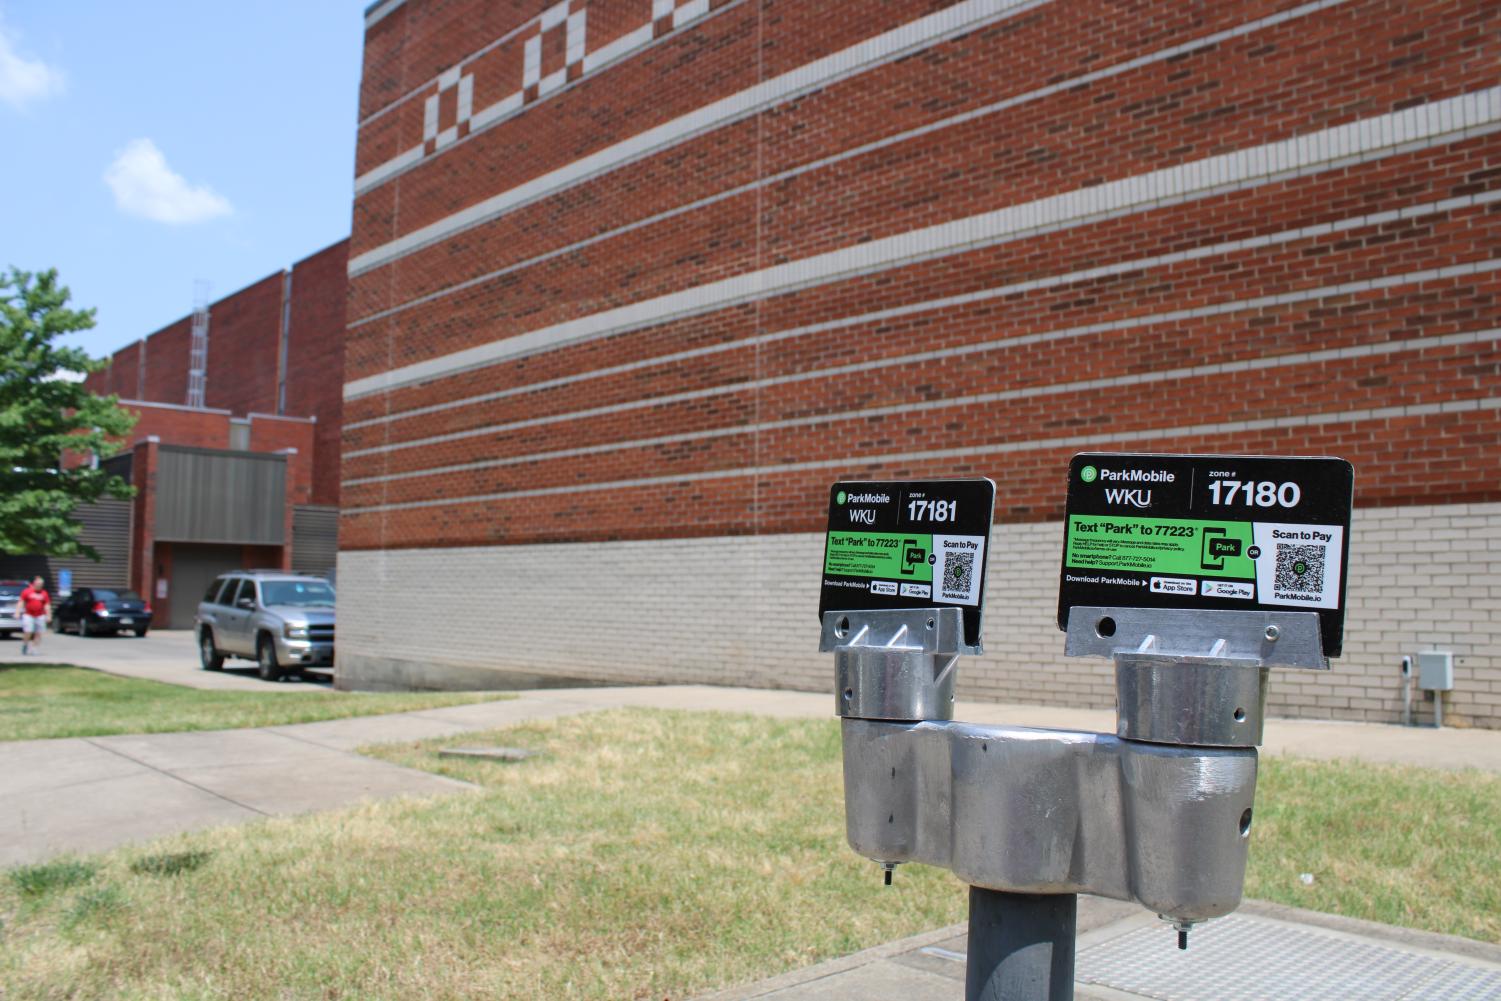 WKU Parking and Transportation replaces parking meters with ParkMobile